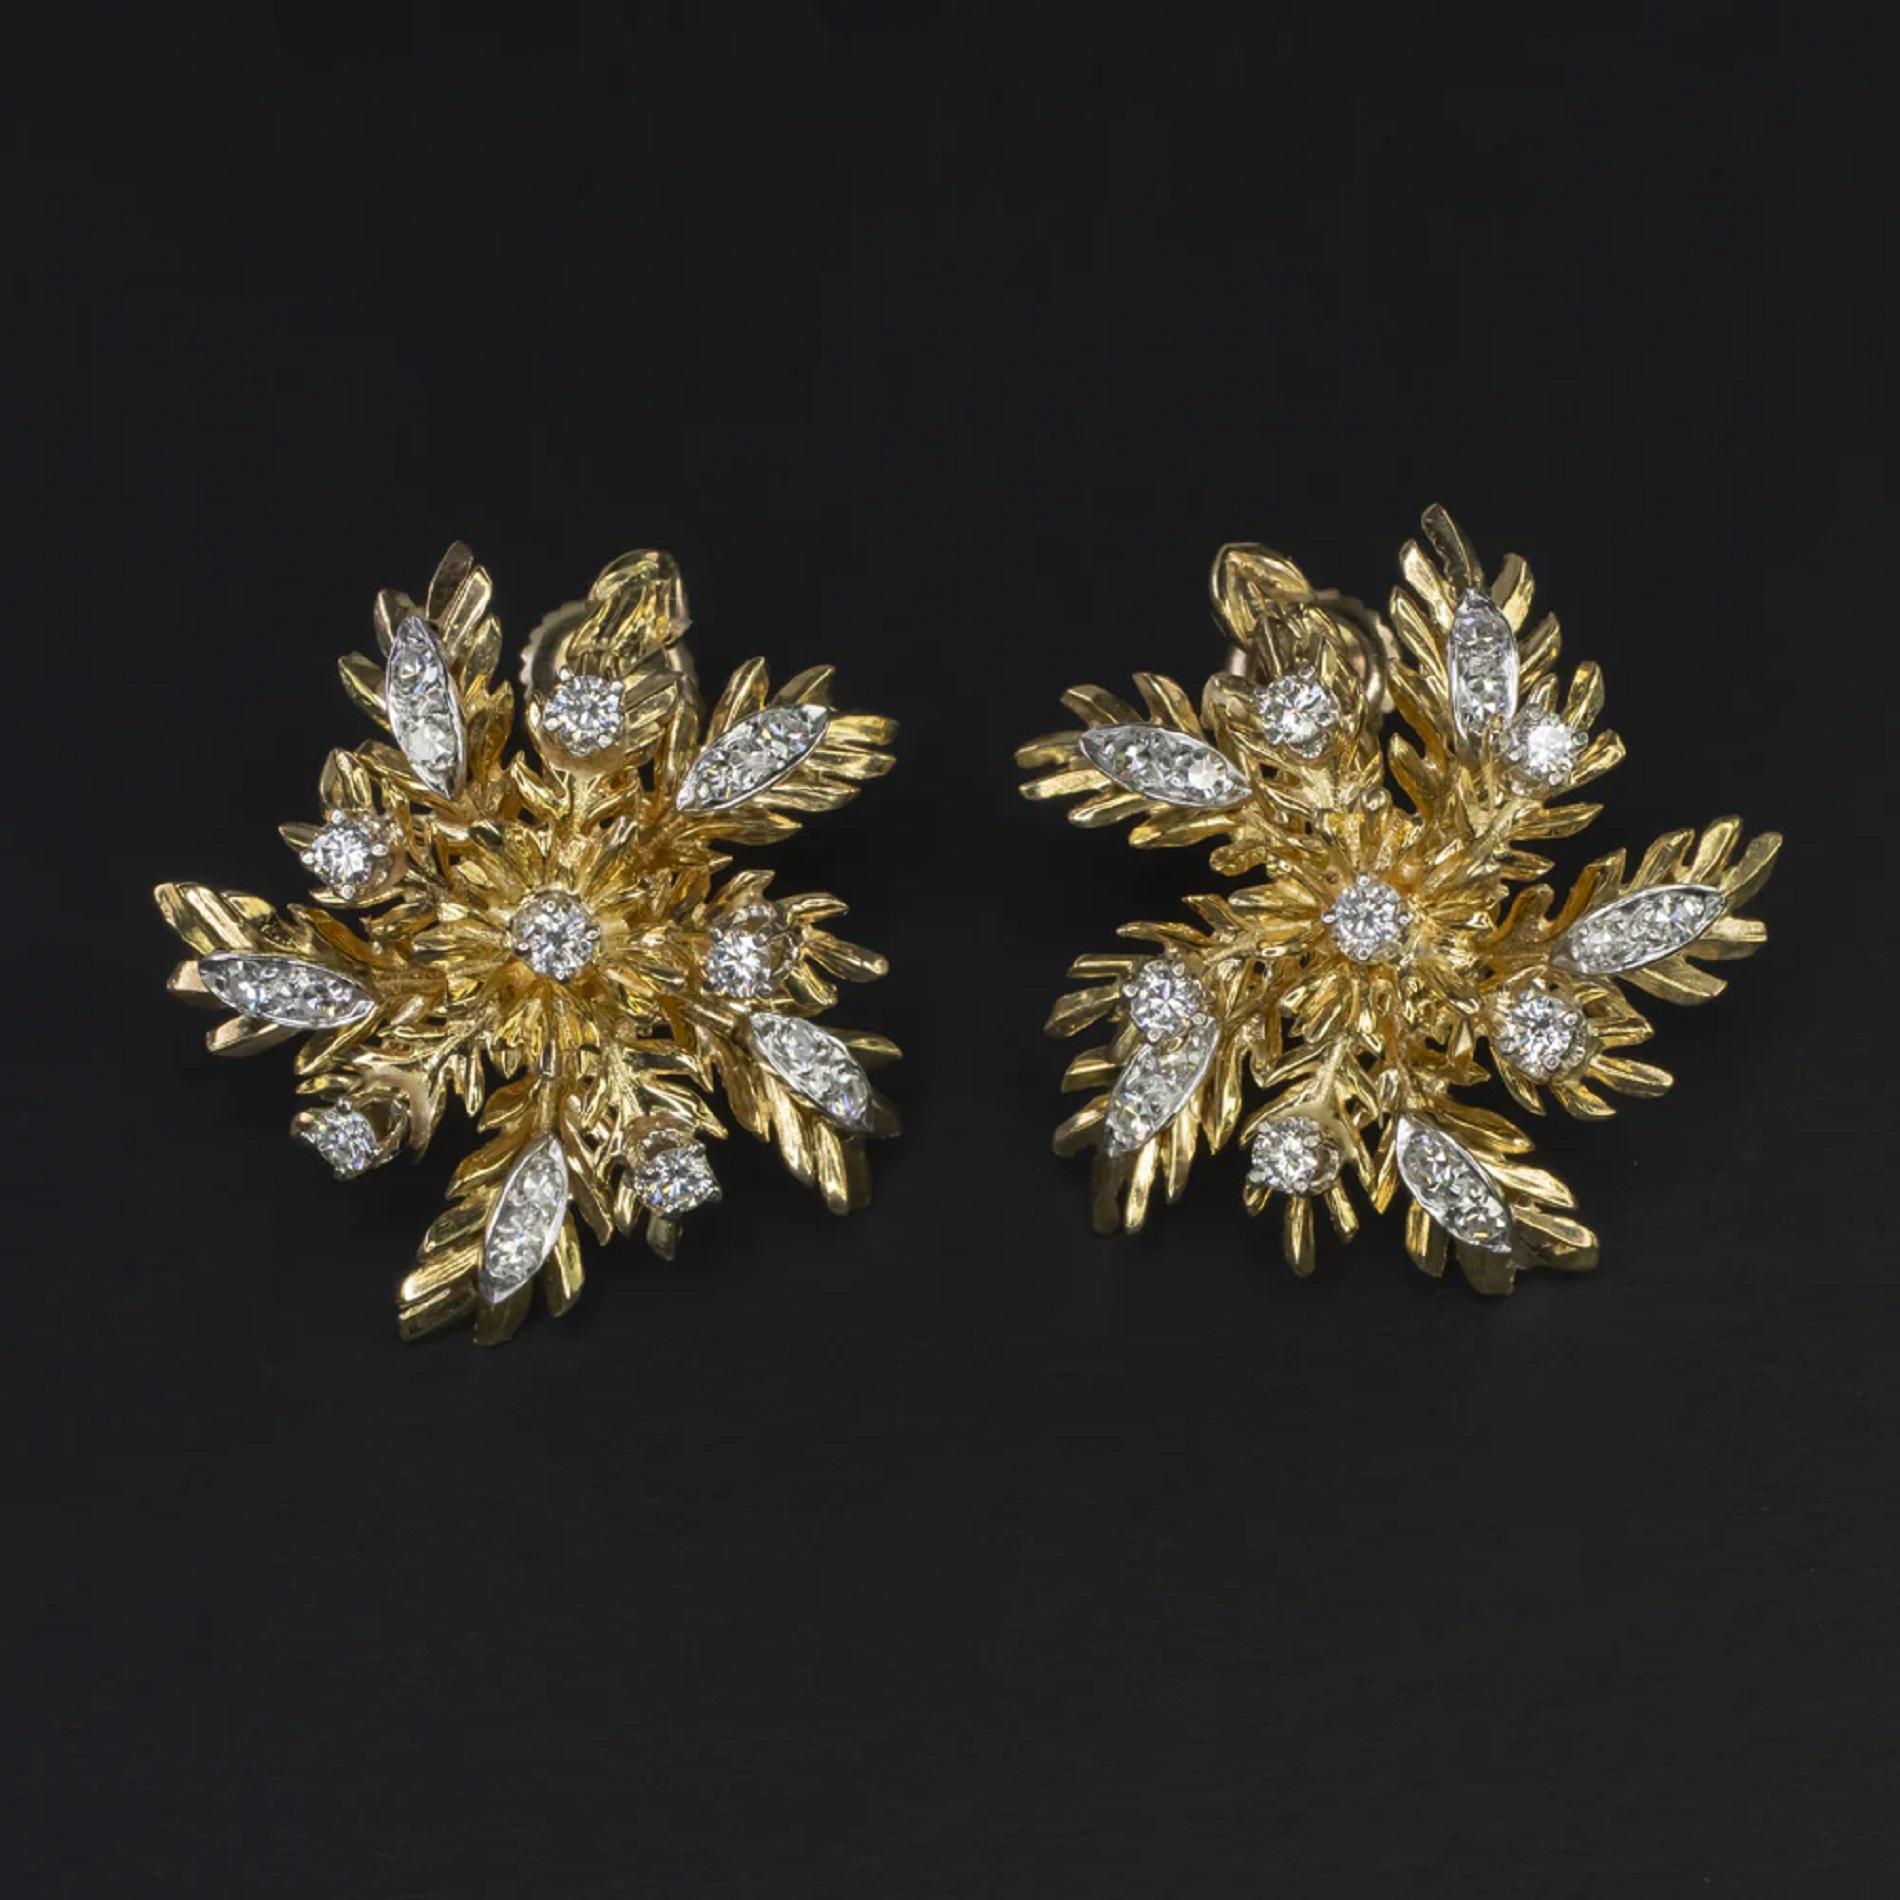 These vintage diamond and 14k yellow gold earrings were handmade during the mid century. They are beautifully crafted with a twirling spray of leaves embellished with bright and vibrant diamonds.

Highlights:

- Overall very high quality!

- 0.88ct